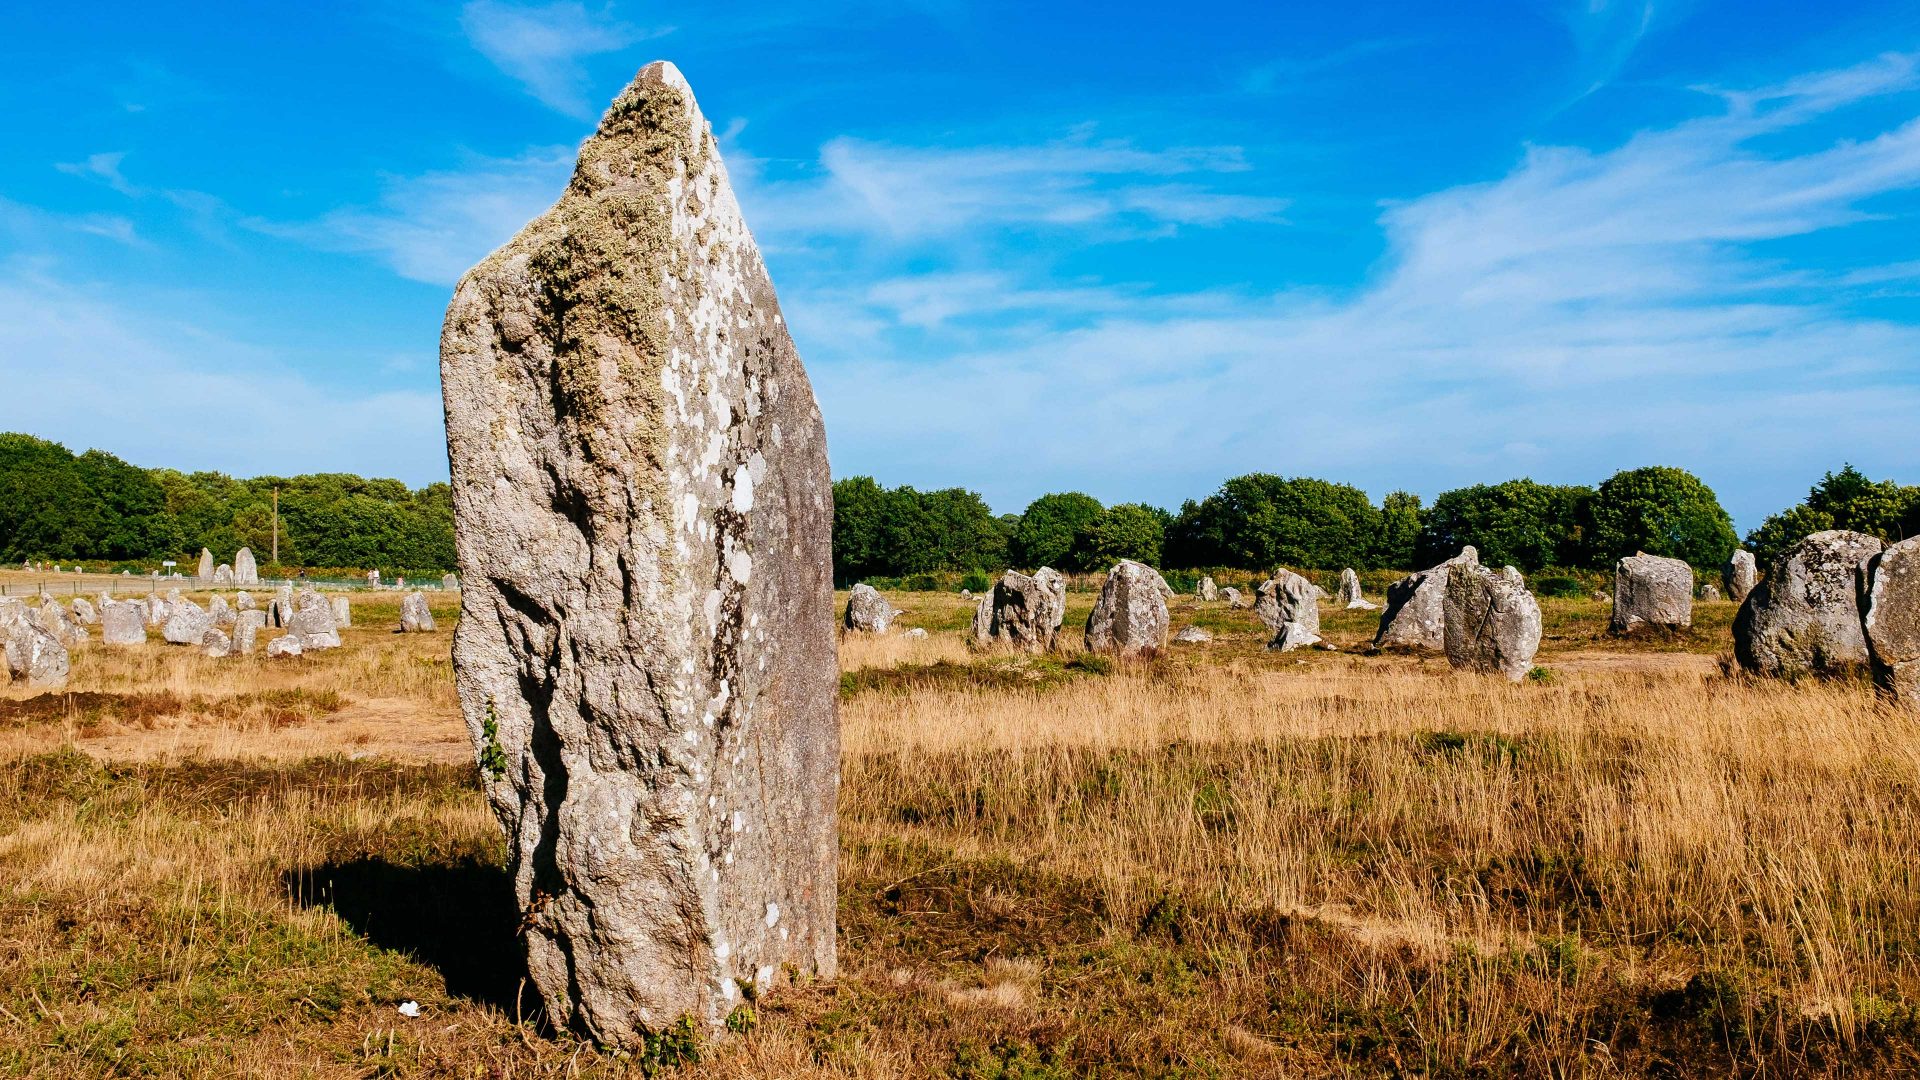 One of the 1029 
Kermario standing stones in Carnac, France. Photo: Raquel Maria 
Carbonell Pagola/
LightRocket
